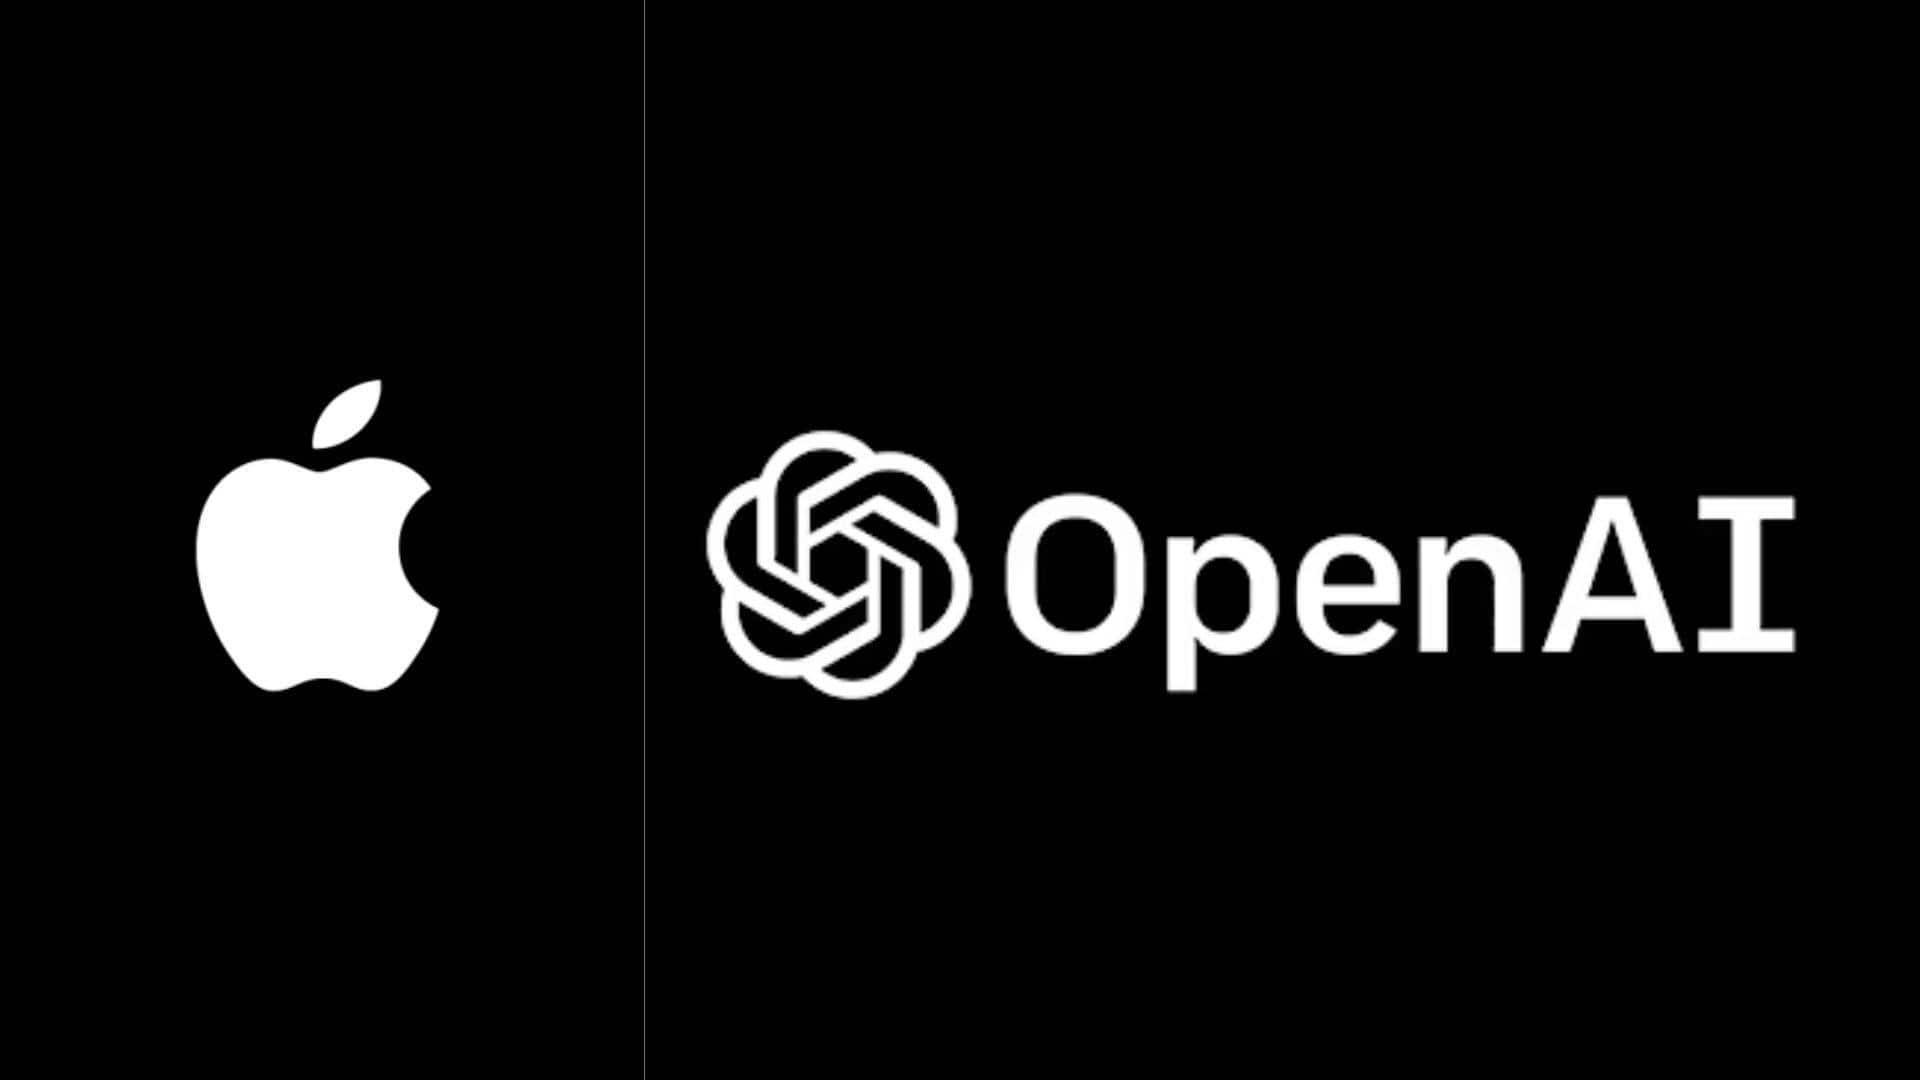 Apple integrates OpenAI's ChatGPT into Siri and other apps